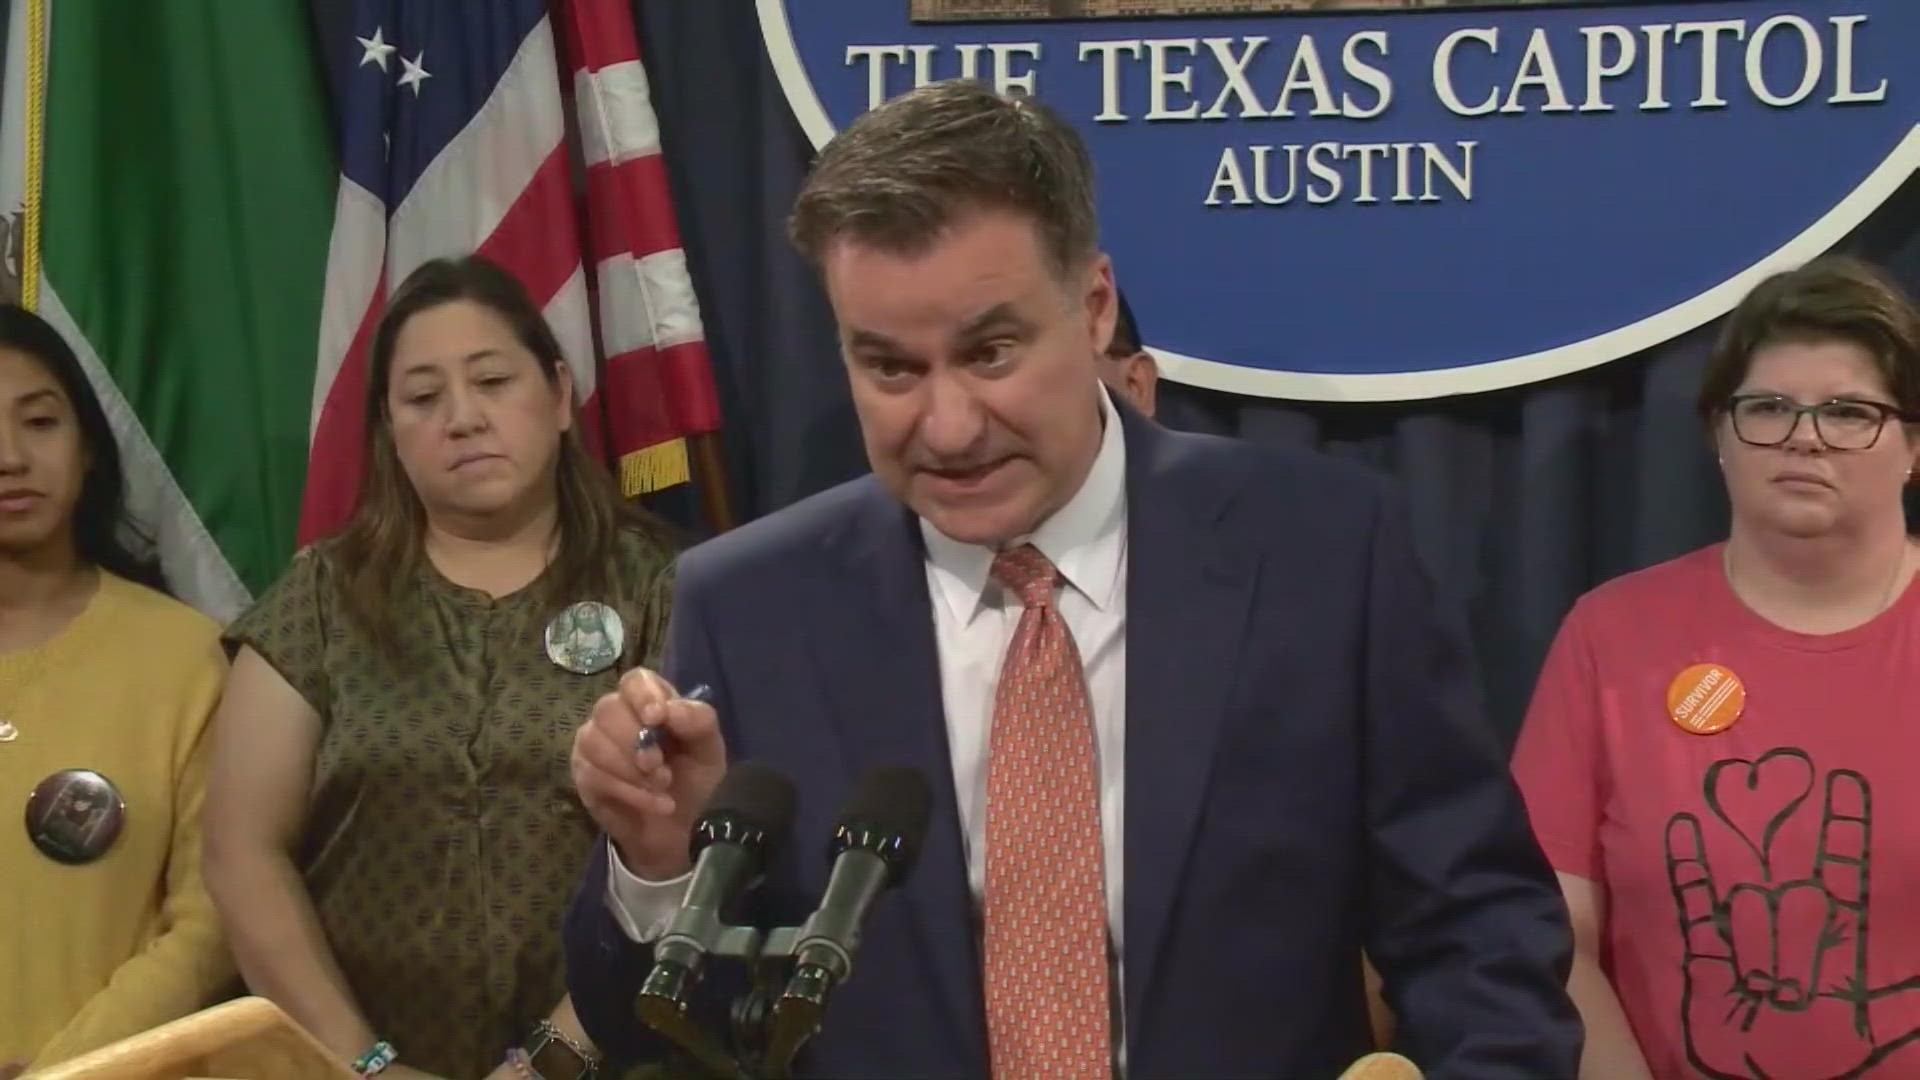 The state senator is set to introduce legislation aimed at issues surrounding current gun laws in Texas.